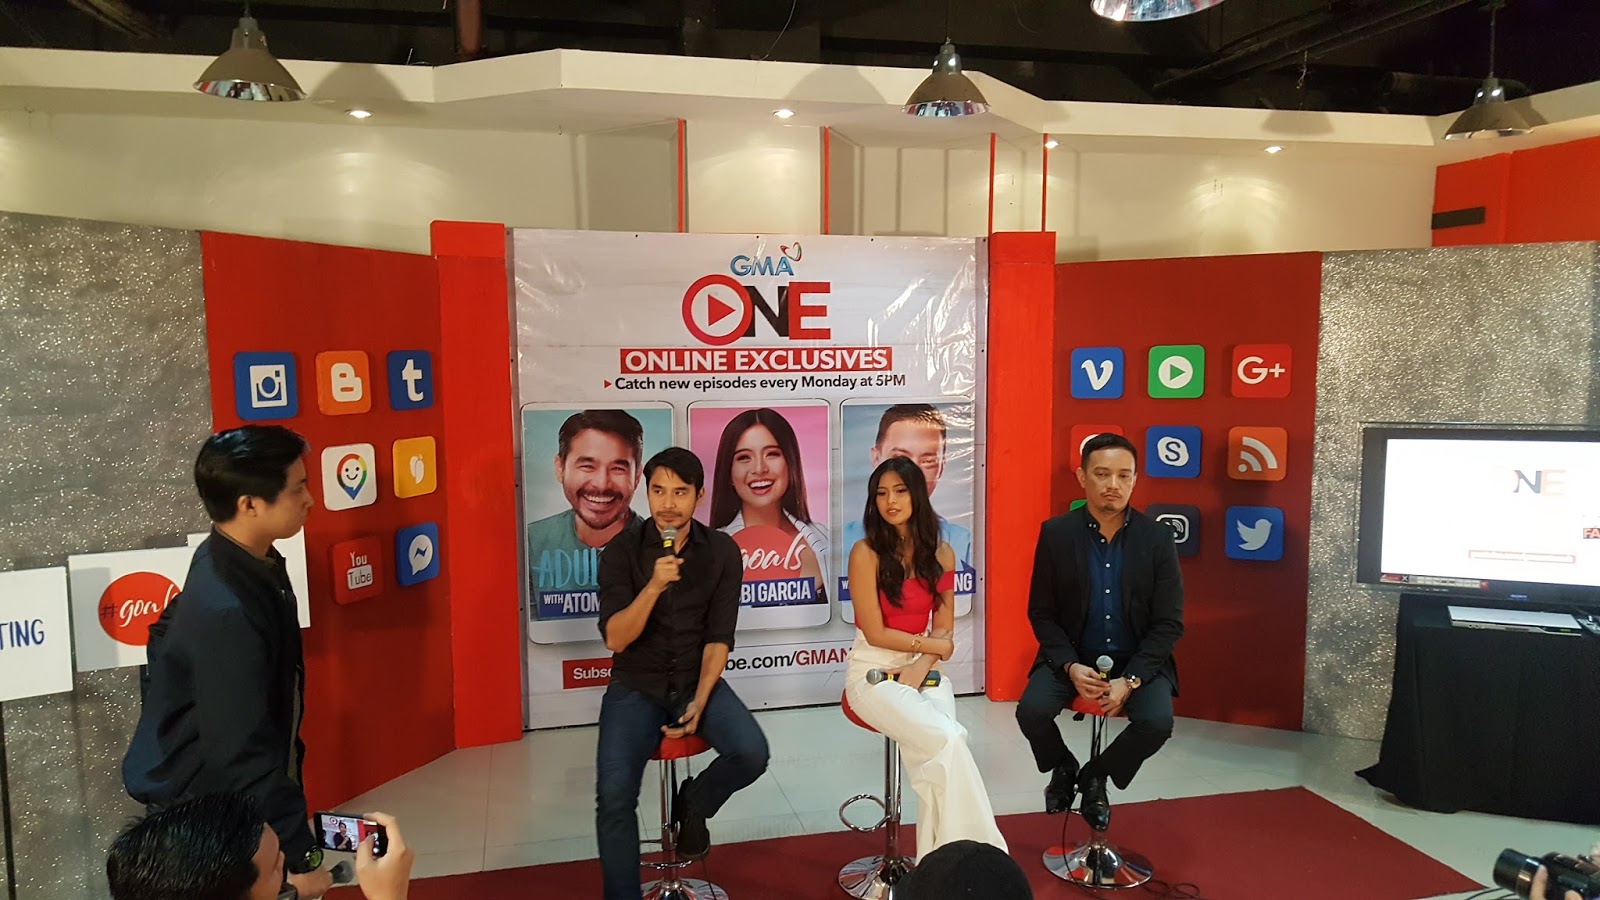 Gma's One- Online Exclusives With Atom Araullo's Adulting, - Event , HD Wallpaper & Backgrounds